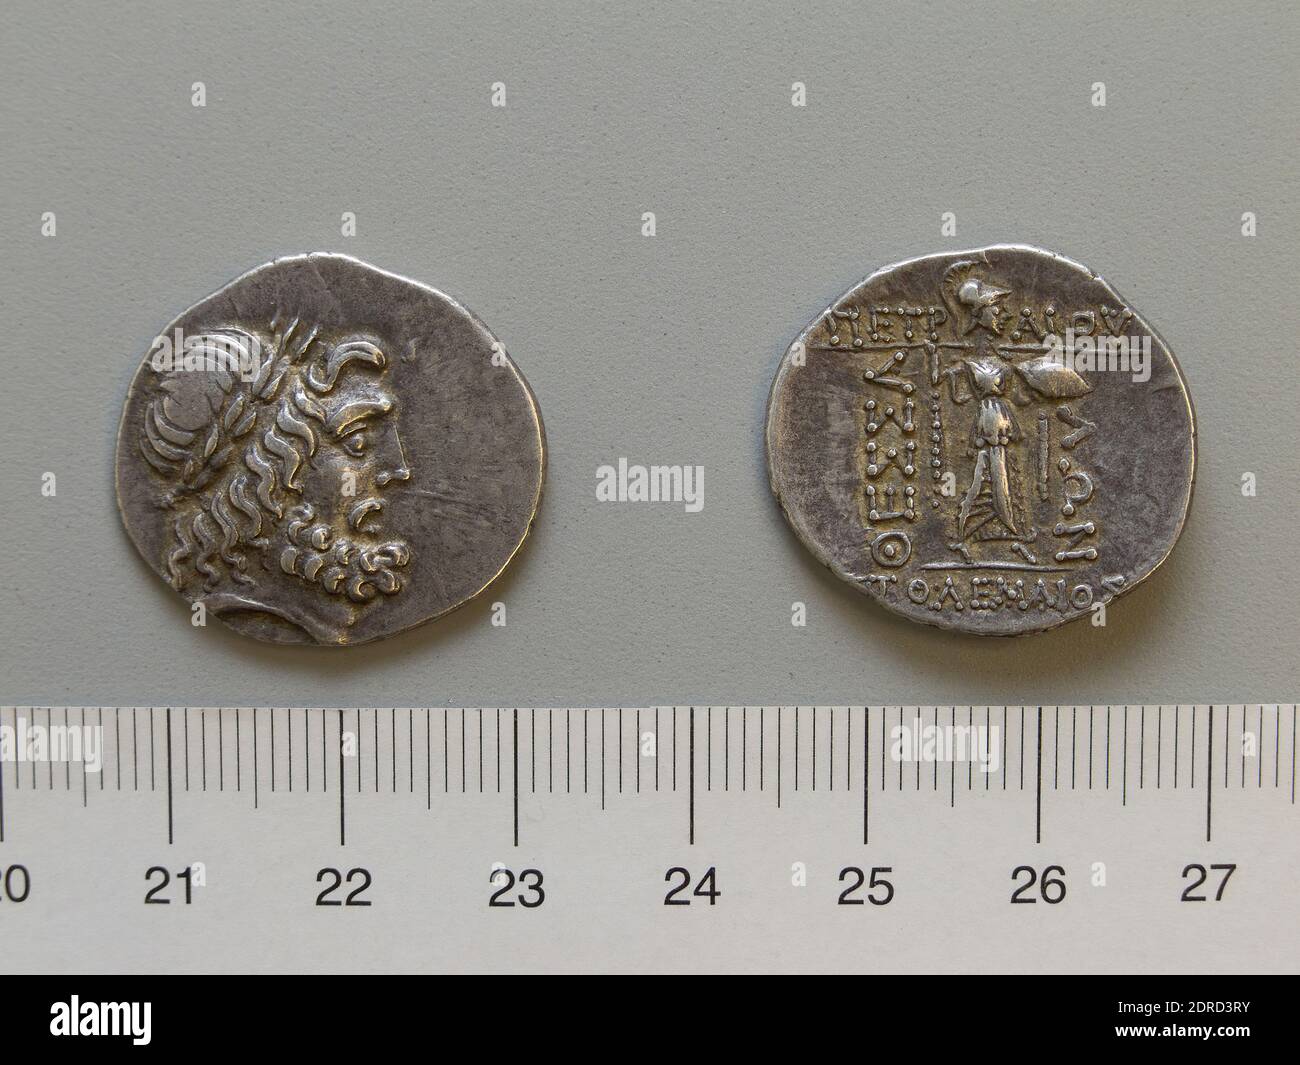 Mint: Thessaly, Coin from Thessaly, 2nd–1st century B.C., Silver, 6.13 g, 12:00, 25.5 mm, Made in Thessaly, Greek, 2nd–1st century B.C., Numismatics Stock Photo